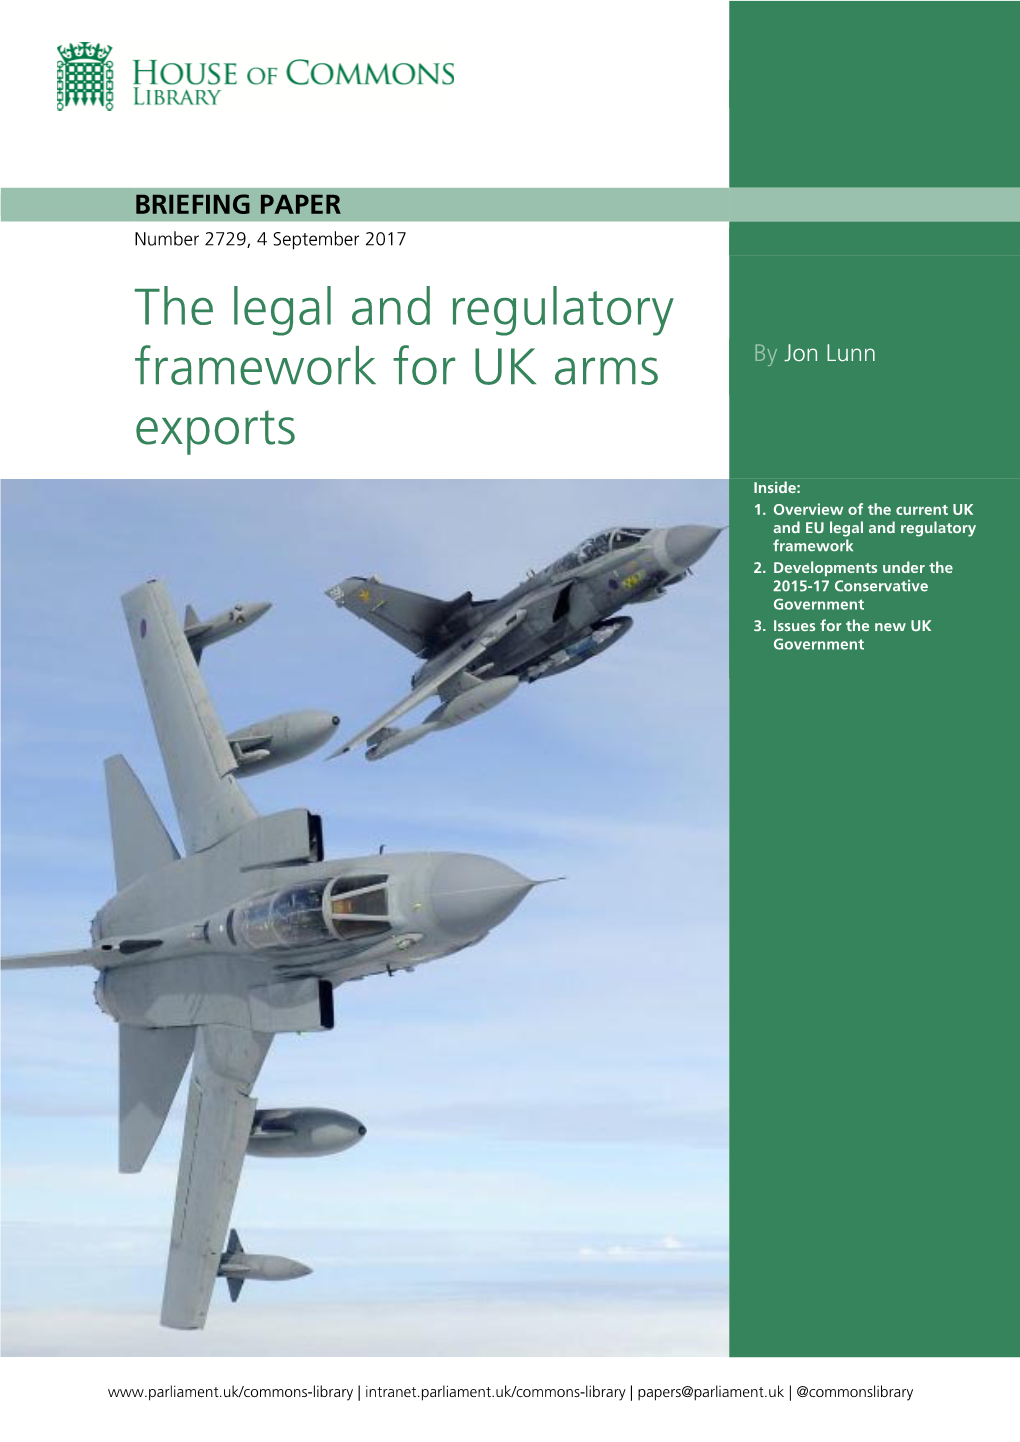 The Legal and Regulatory Framework for UK Arms Exports